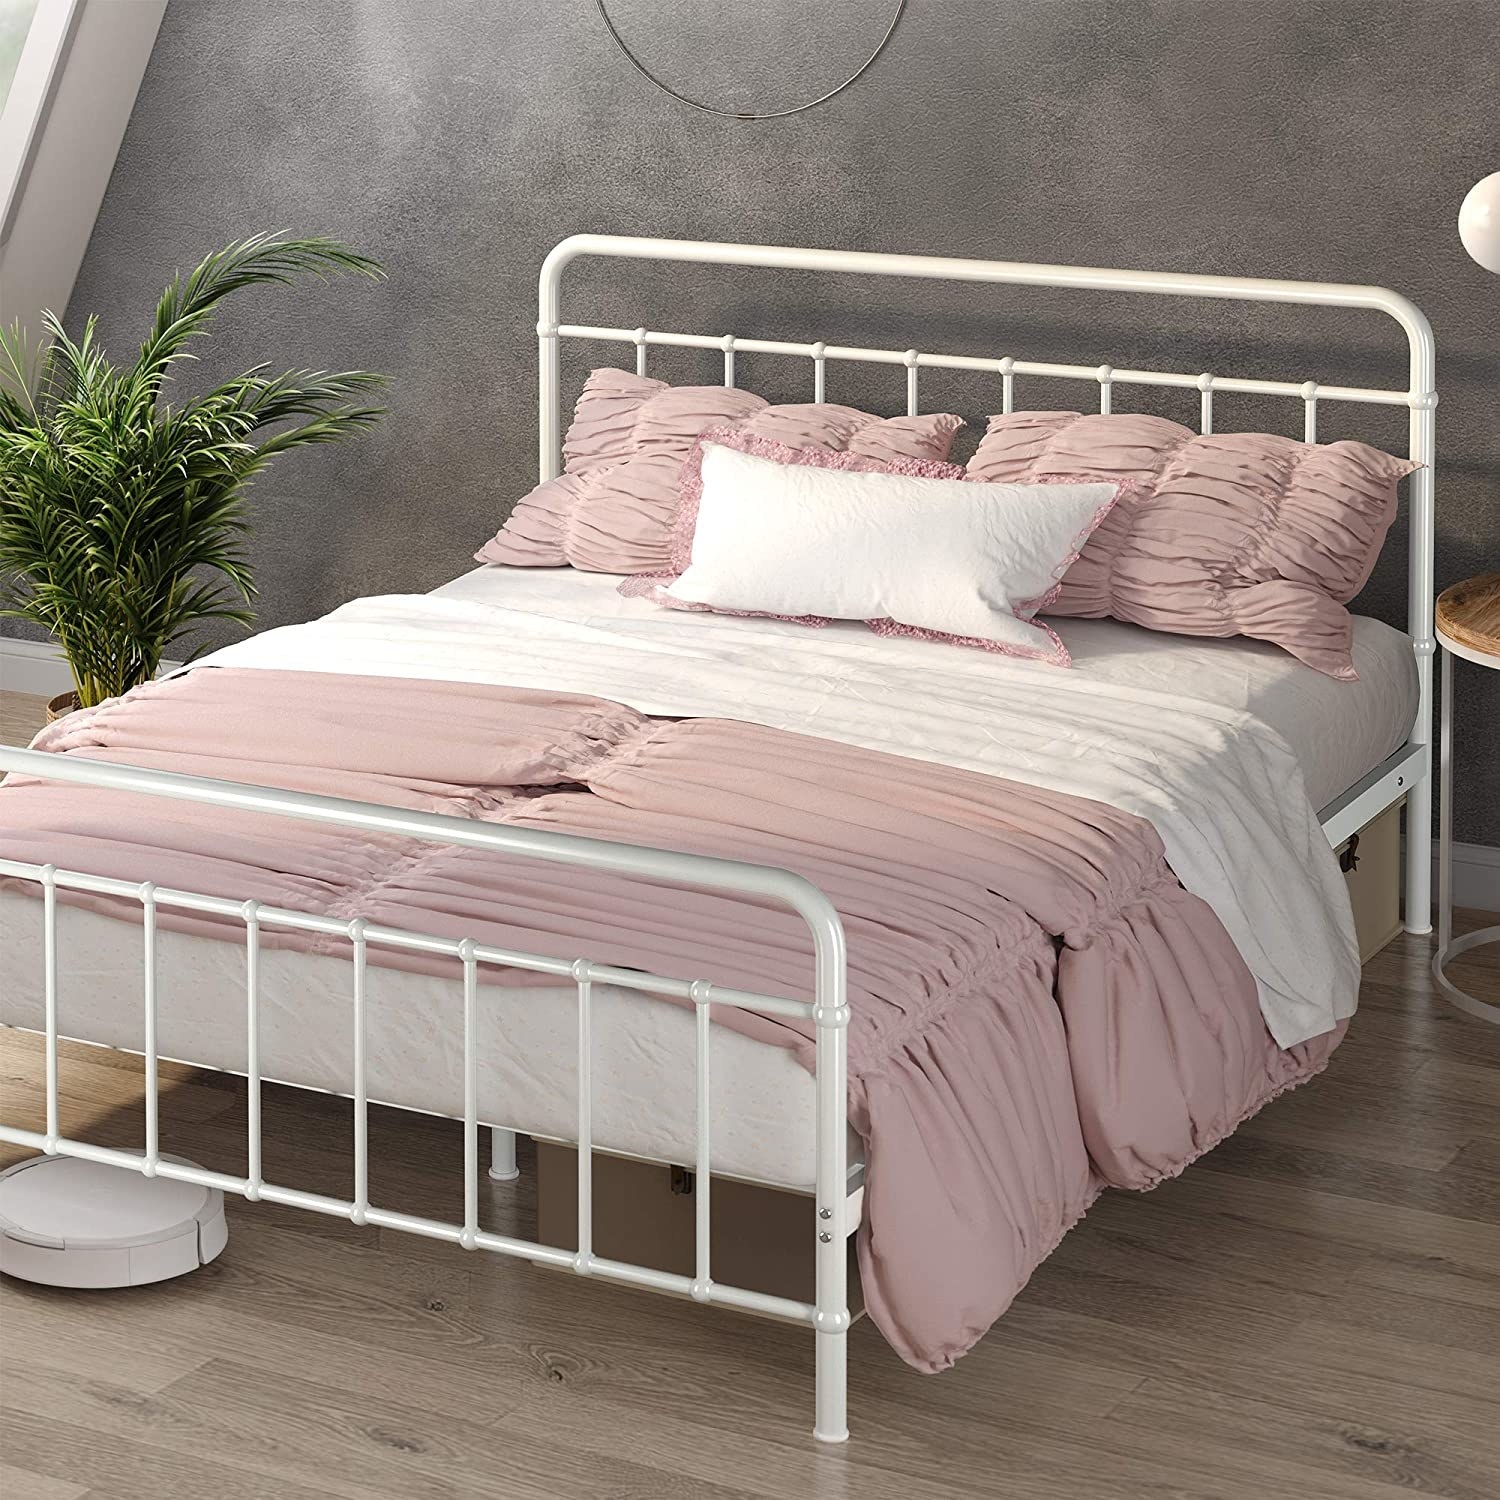 29 Bed Frames That Ll Basically Be The, Cute Full Size Bed Frames